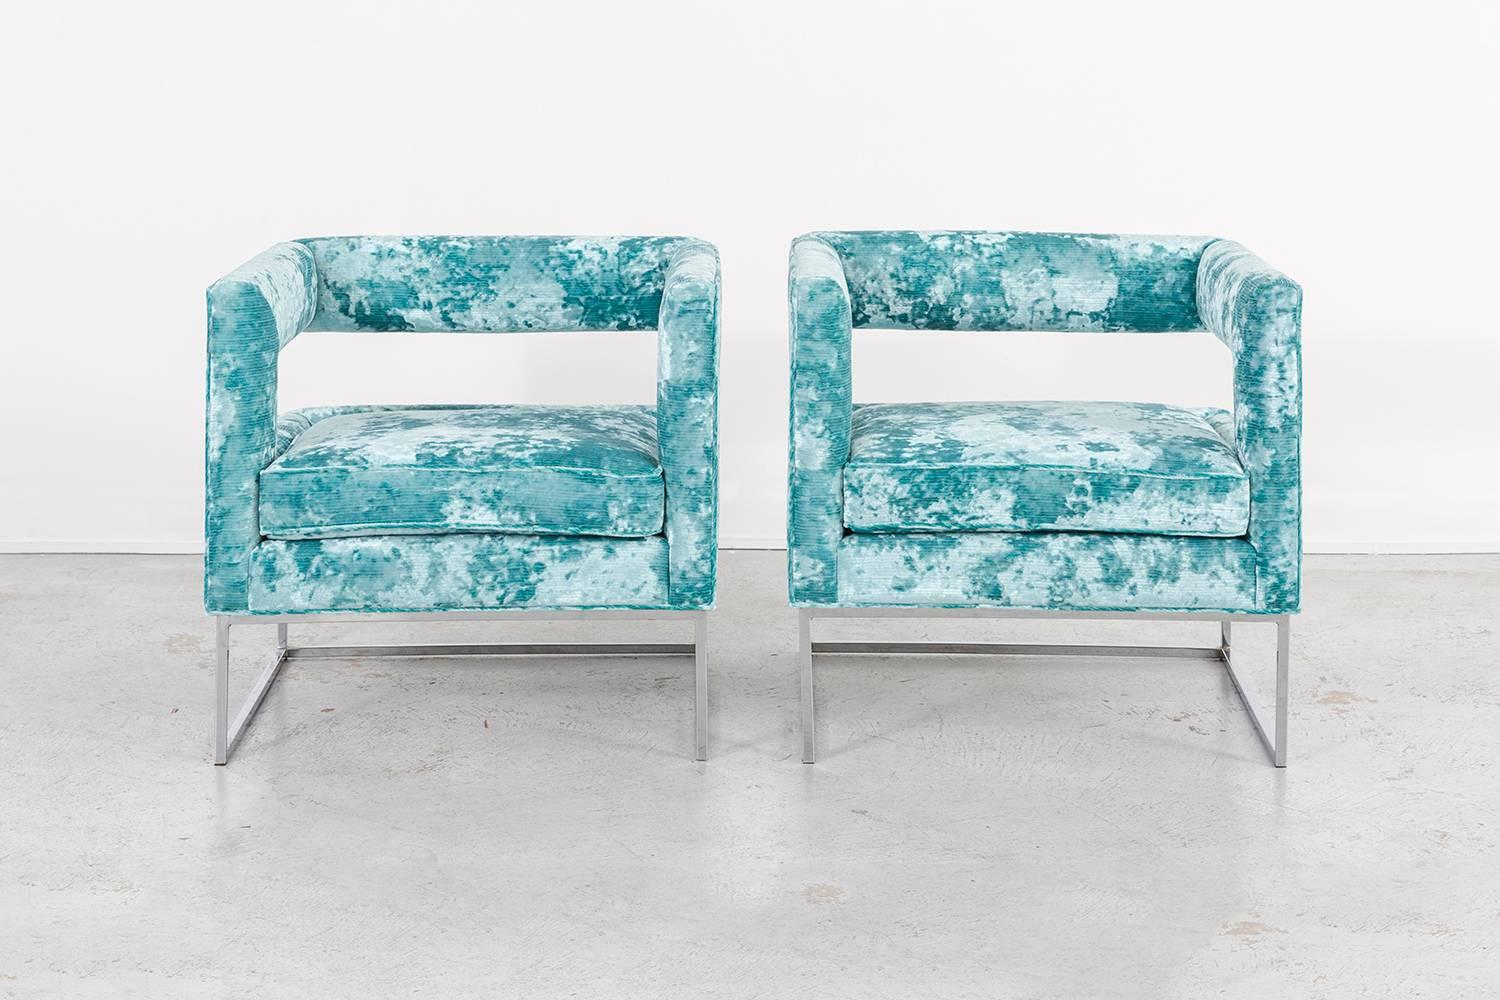 set of two open back chairs

often misattributed to Milo Baughman

USA, circa 1970s

chrome bases and reupholstered in velvet 

26” H x 28 ½” W x 26” D x seat 16” H

sold as a set.

fabric sample available upon request